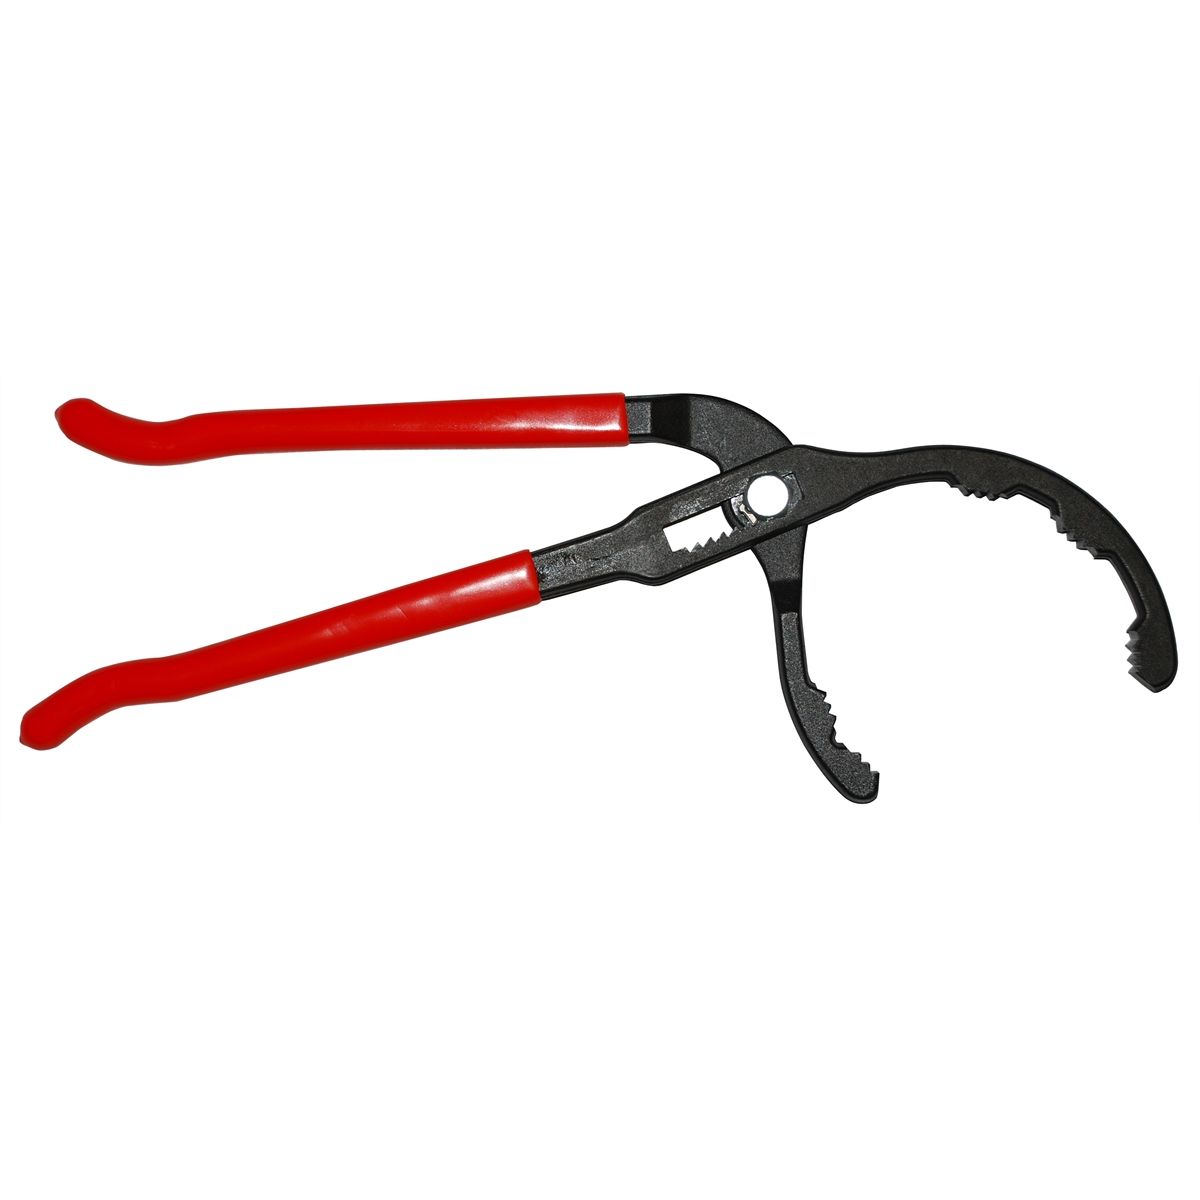 Truck Tractor Oil Filter Pliers